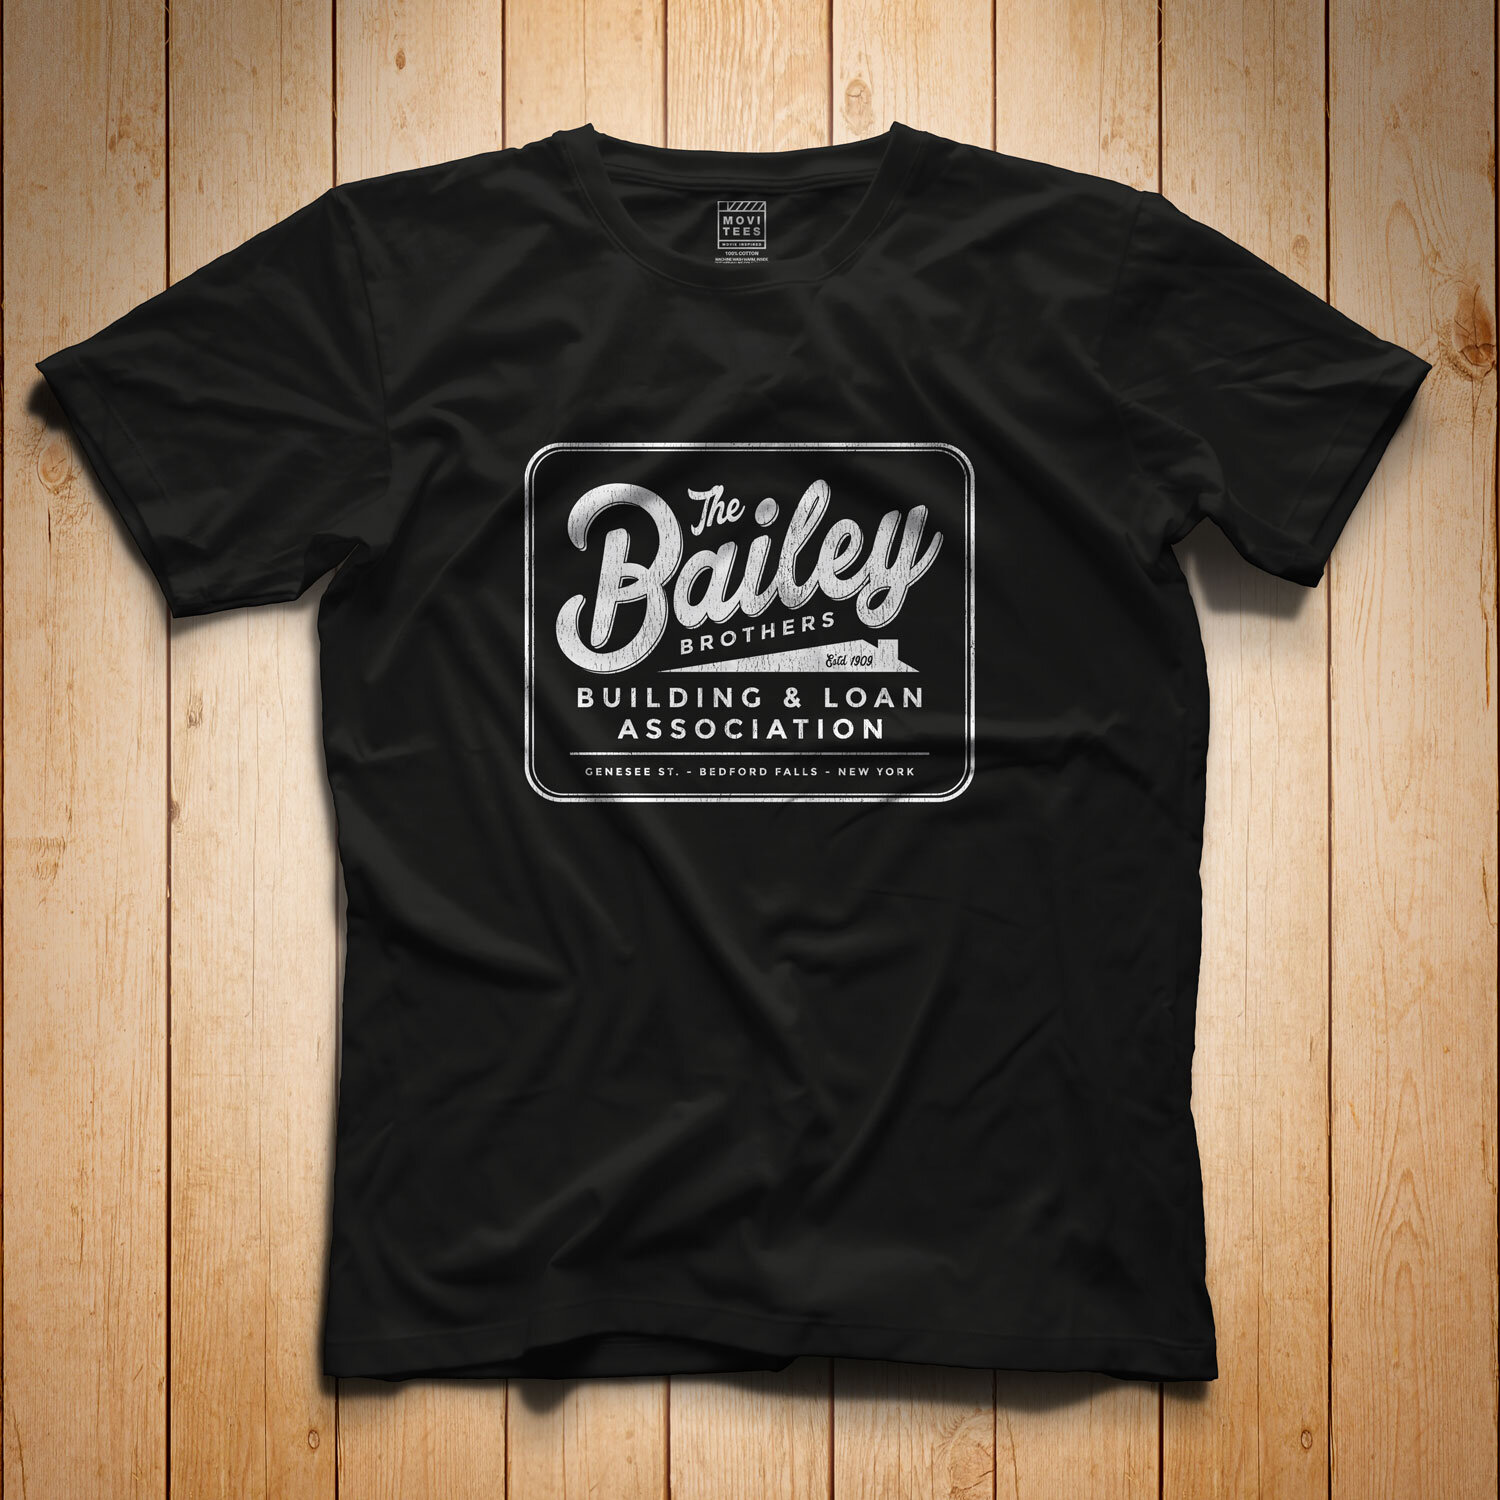 The Bailey Brothers T-Shirt inspired by It’s a Wonderful Life - Regular ...